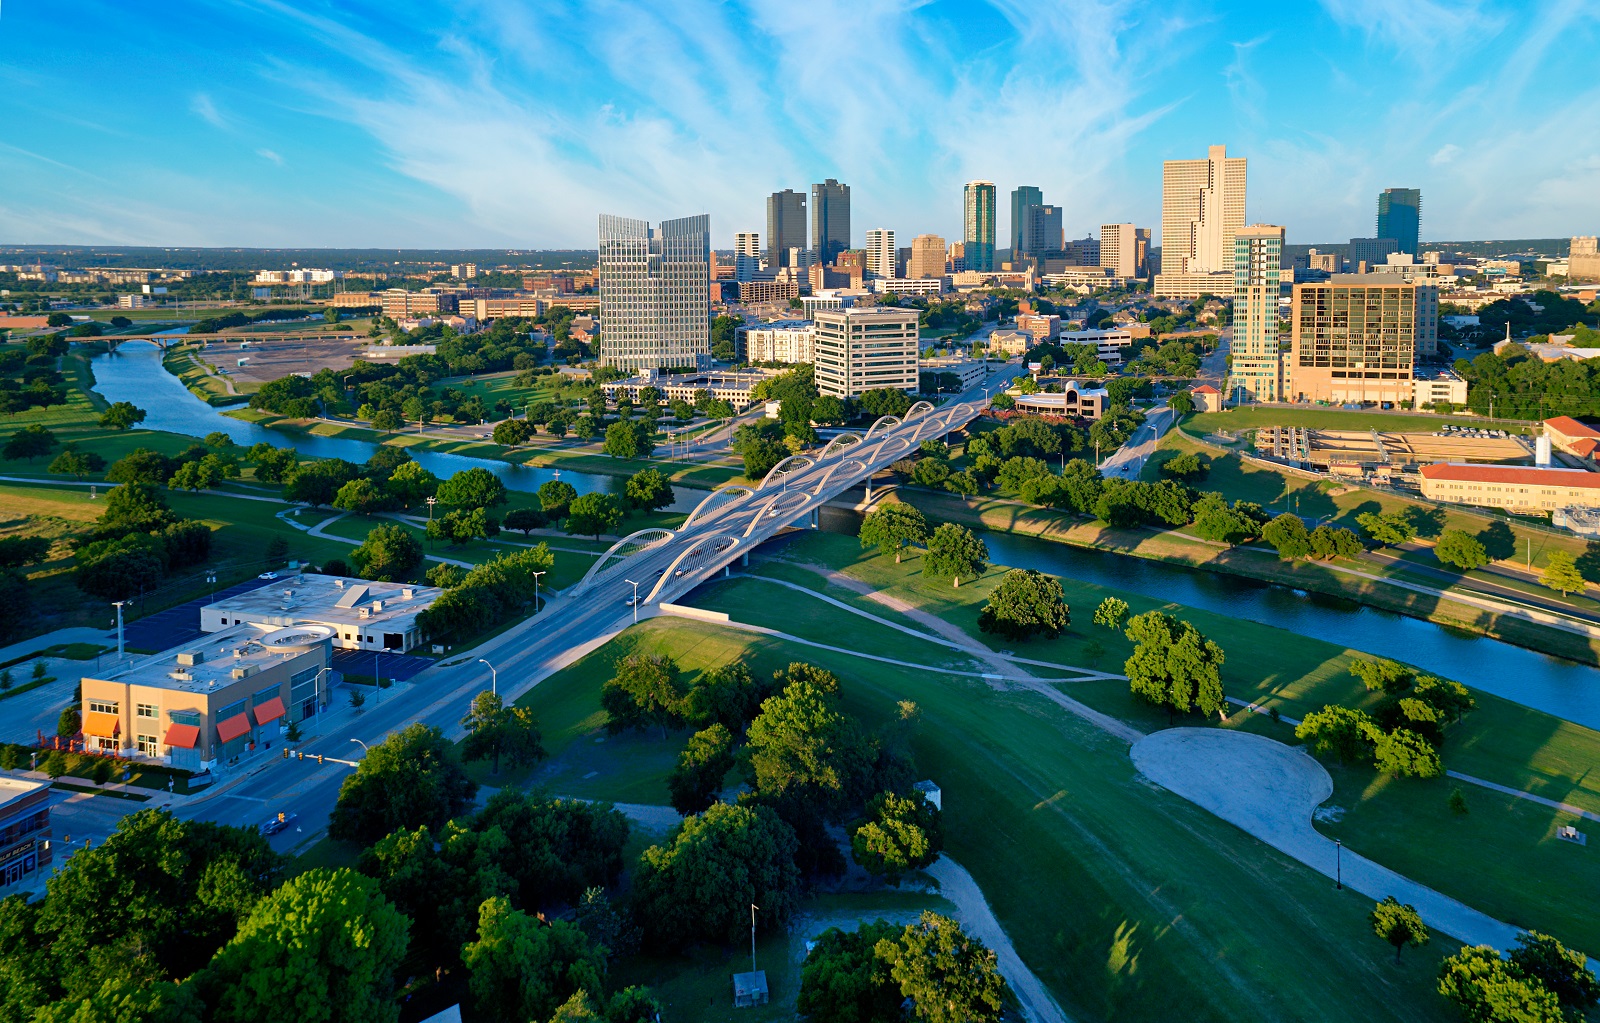 <p class="wp-caption-text">Image Credit: Shutterstock / Barbara Smyers</p>  <p><span>Fort Worth provides a laid-back driving experience with less traffic than many large cities and plenty of parking, particularly in its sprawling suburbs.</span></p>